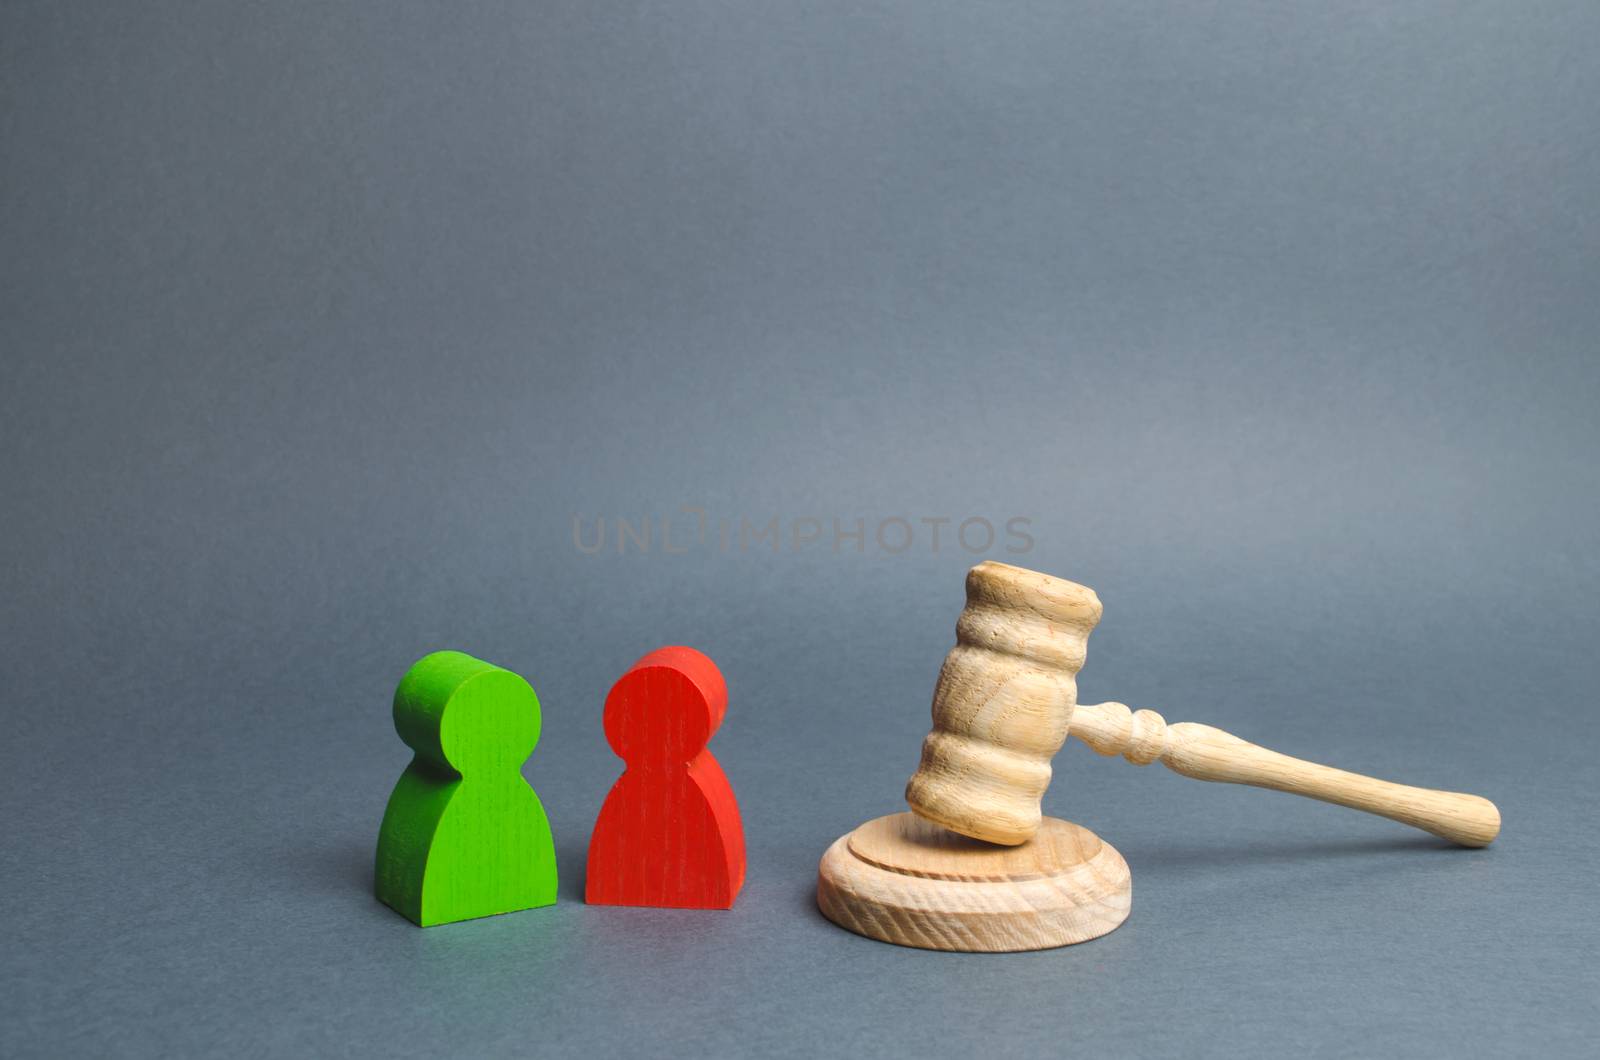 Two figures of people opponents stand near the judge's gavel. Conflict resolution in court, claimant and respondent. Court case, resolution and disputes settling disputes. The judicial system.